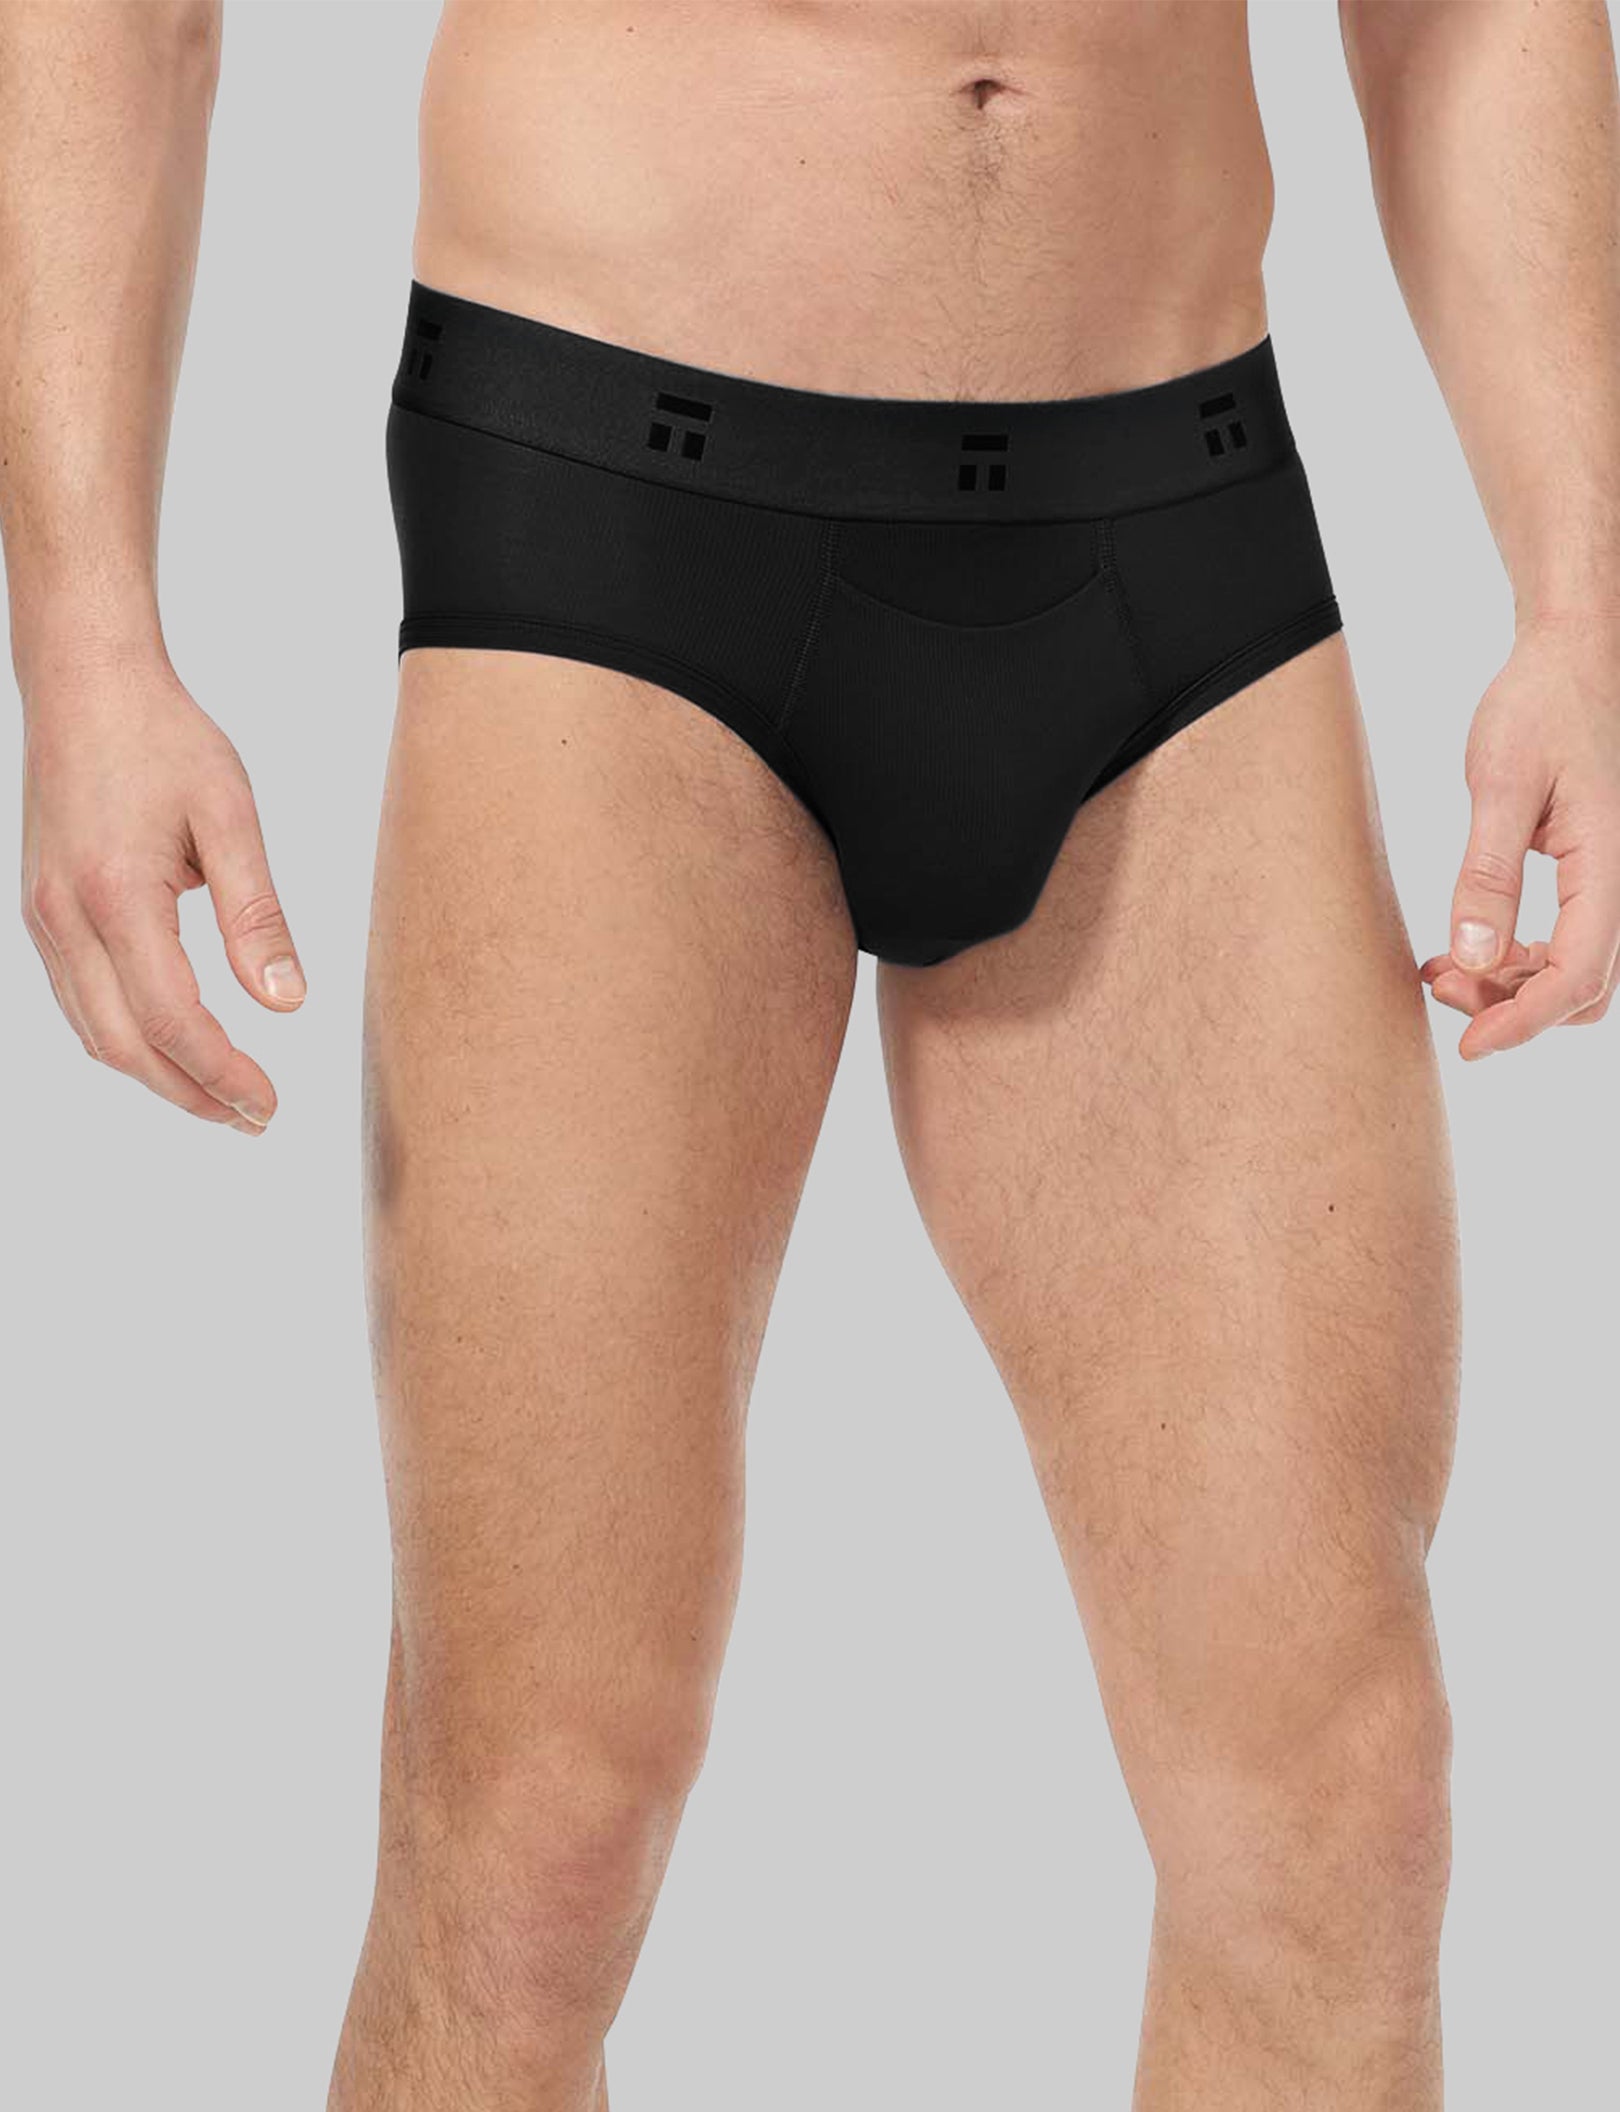 What is a Contour Pouch? The pouch is the center-front section of men's  underwear, and the contour is the new shape it now has thanks to a  vertical